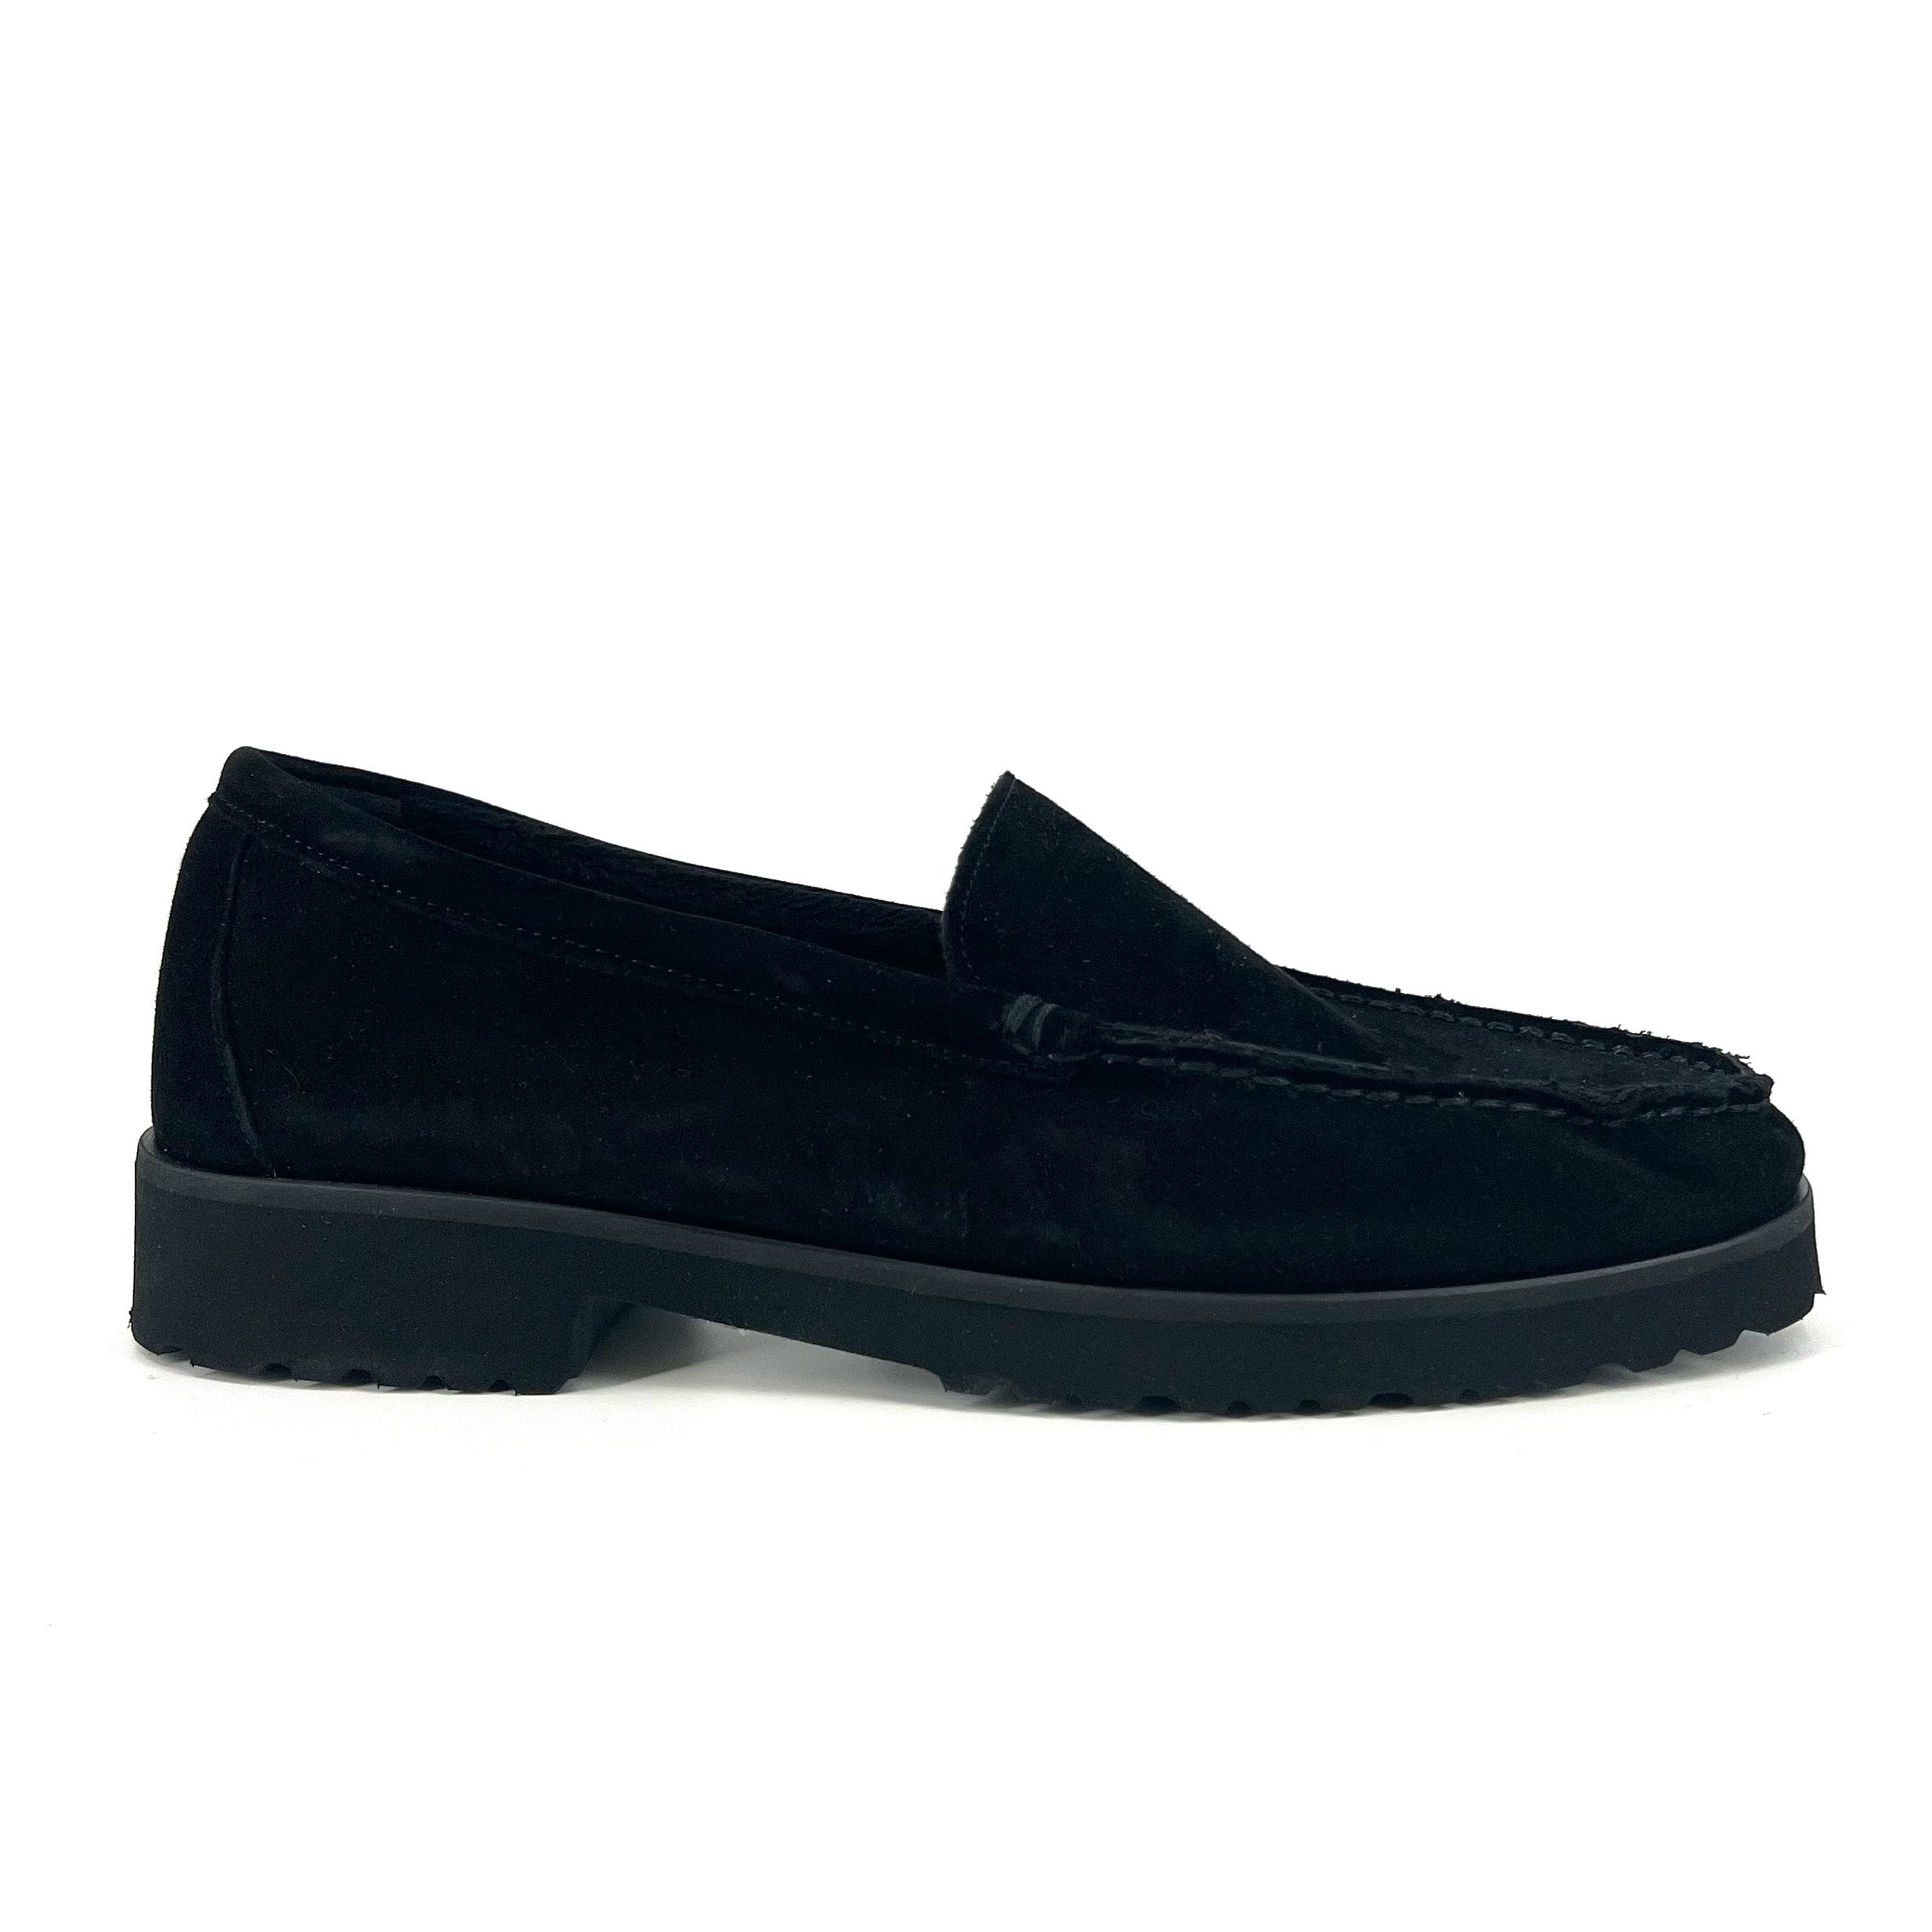 The Cozy Lined Loafer in Black